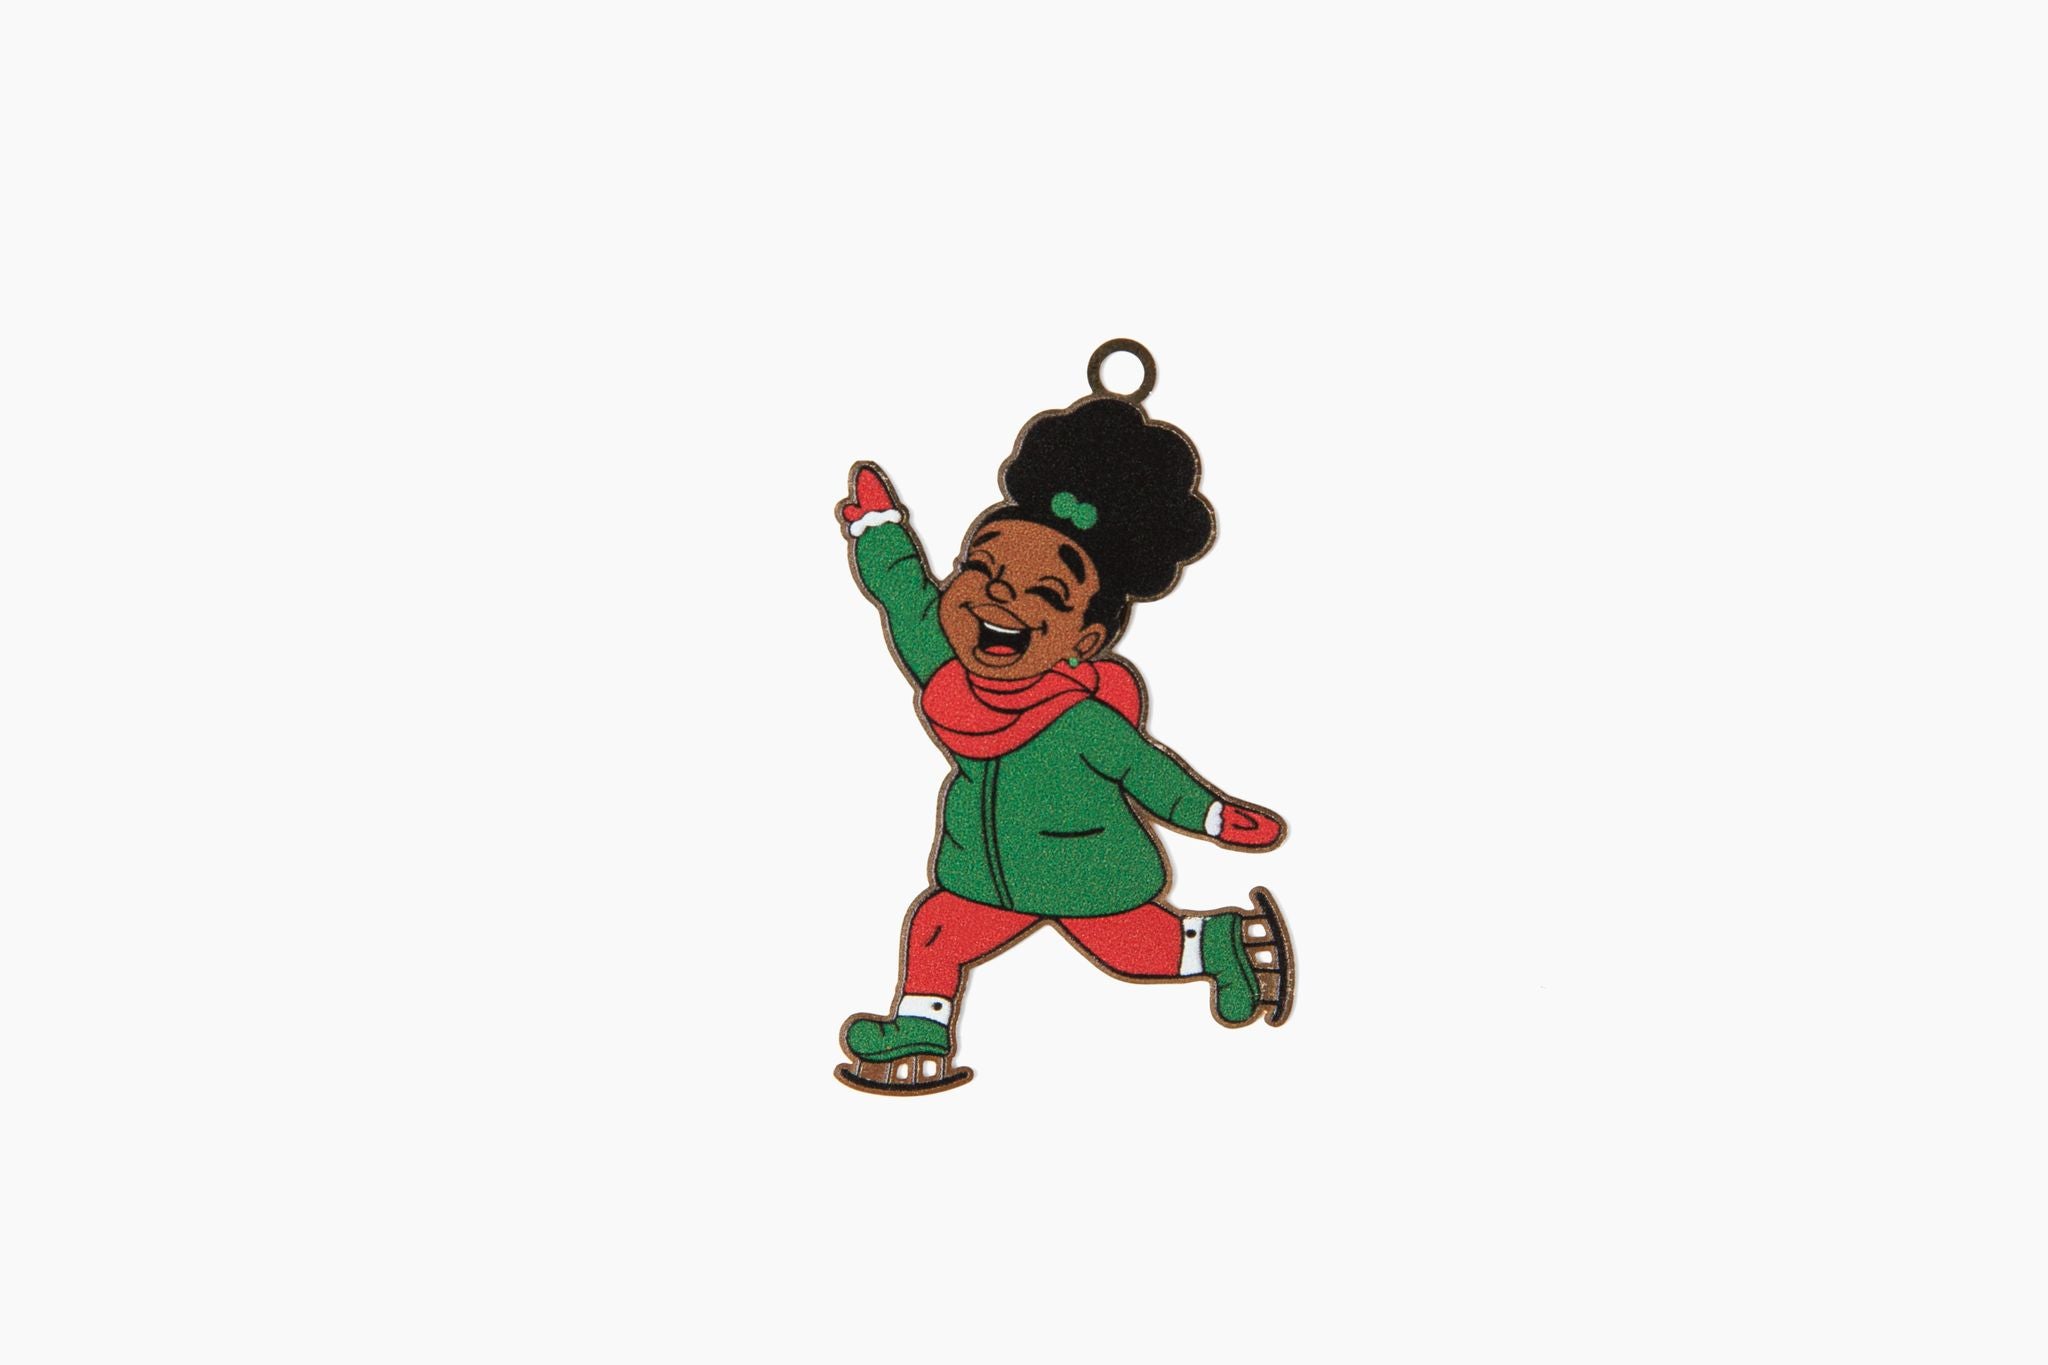 an ornament front featuring a young black girl smiling and wearing a green coat with ice skates